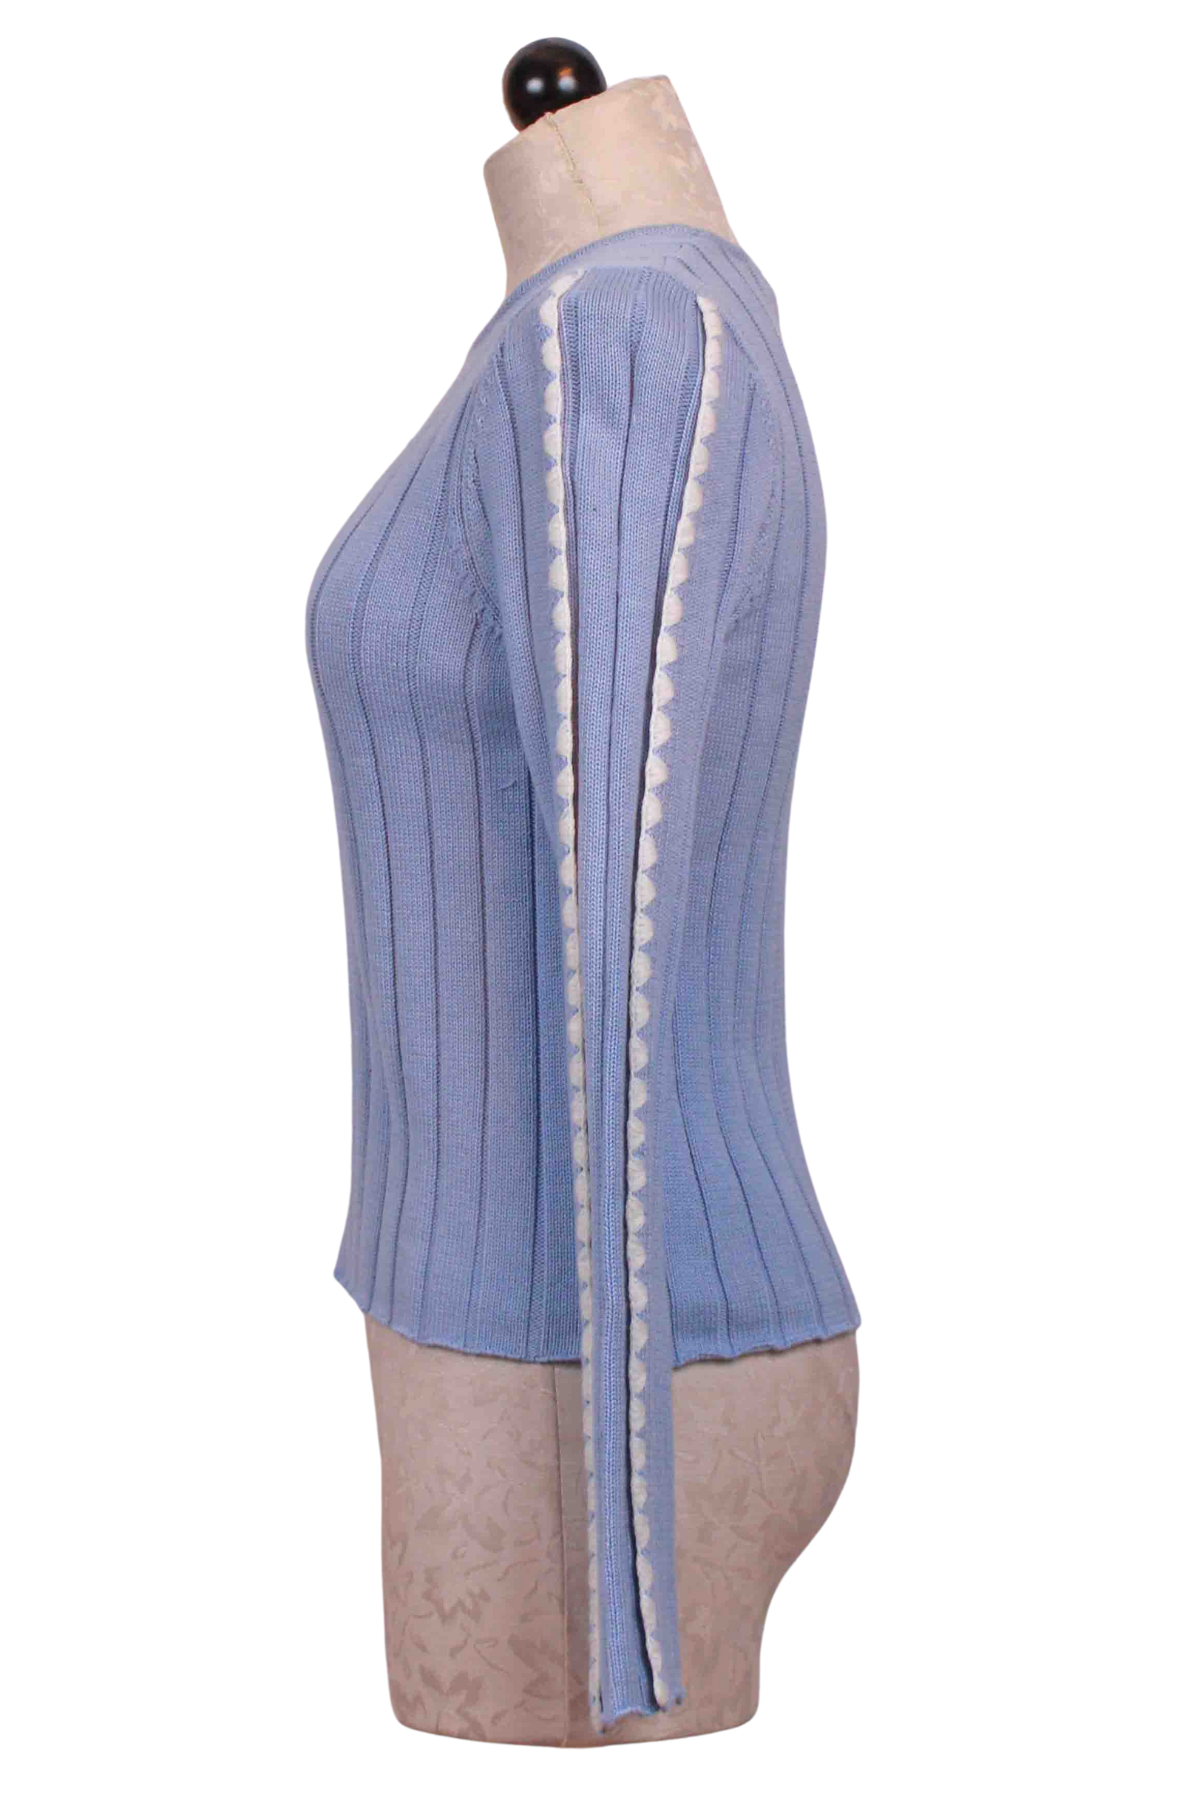 side view of Heron Blue and Ivory Eli Knit Top by Mon Renn